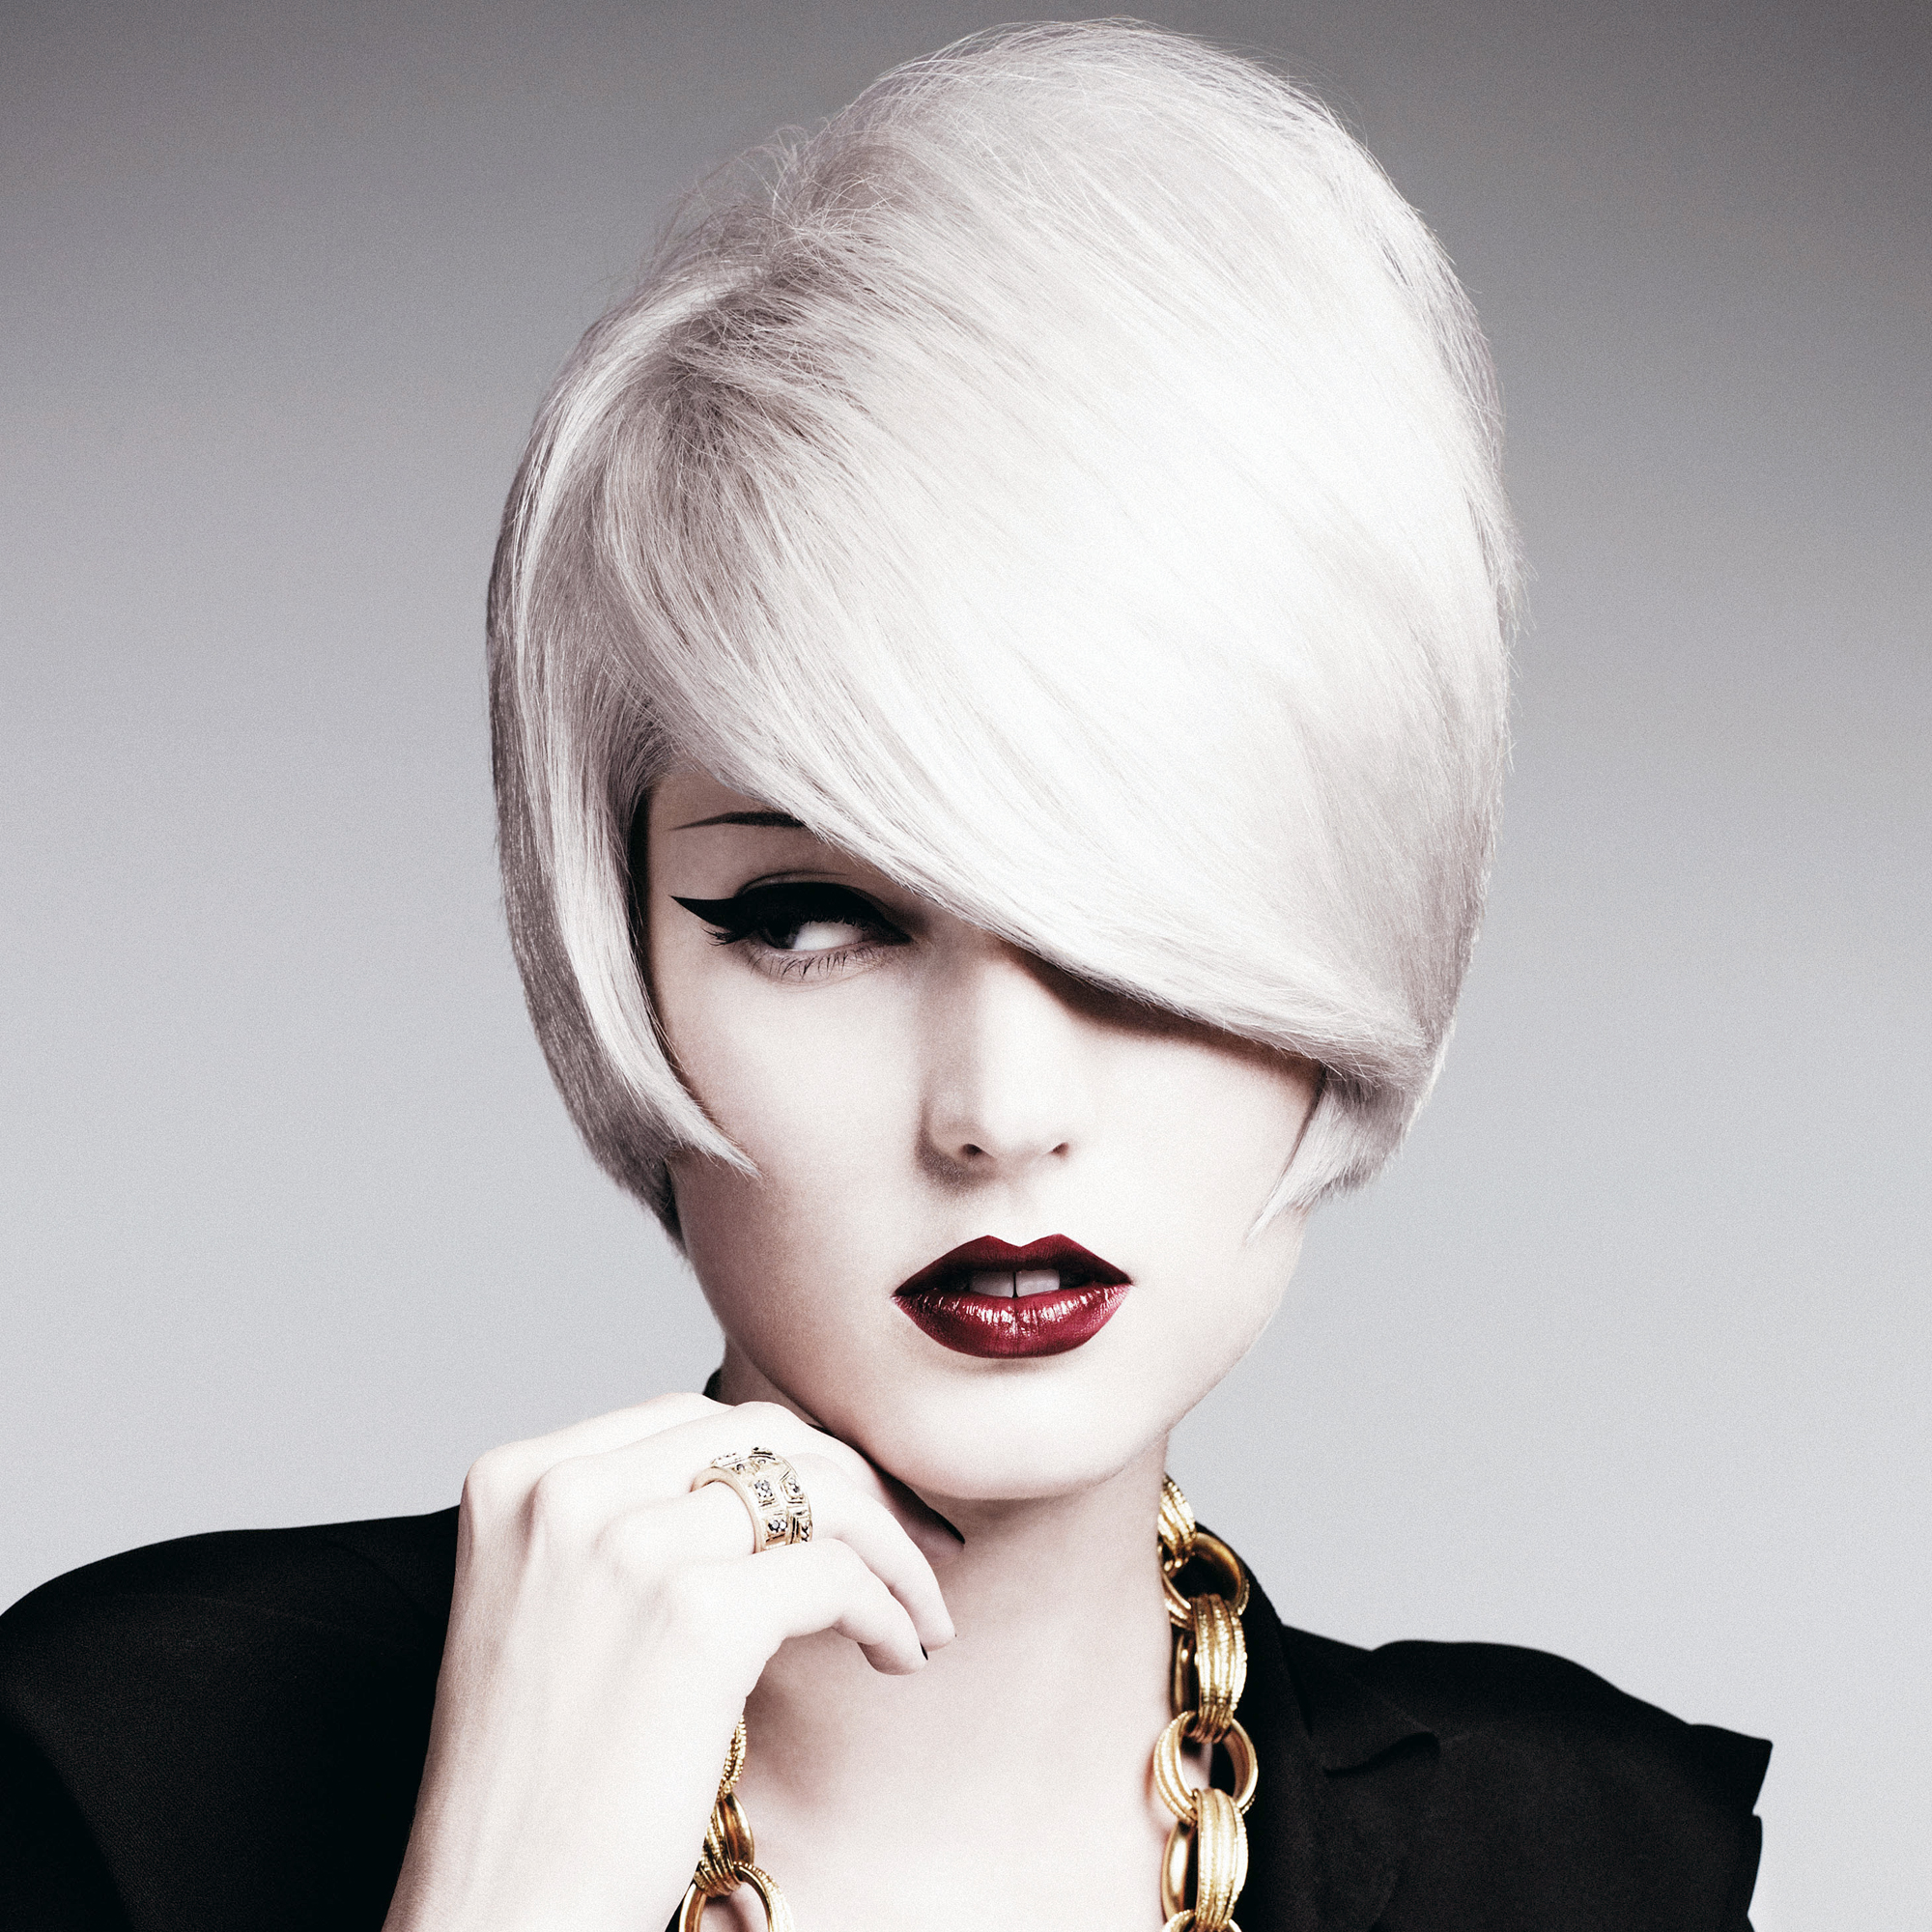 60s bob hairstyle-hair-hairstyles-autumn winter hairstyles-beauty ...